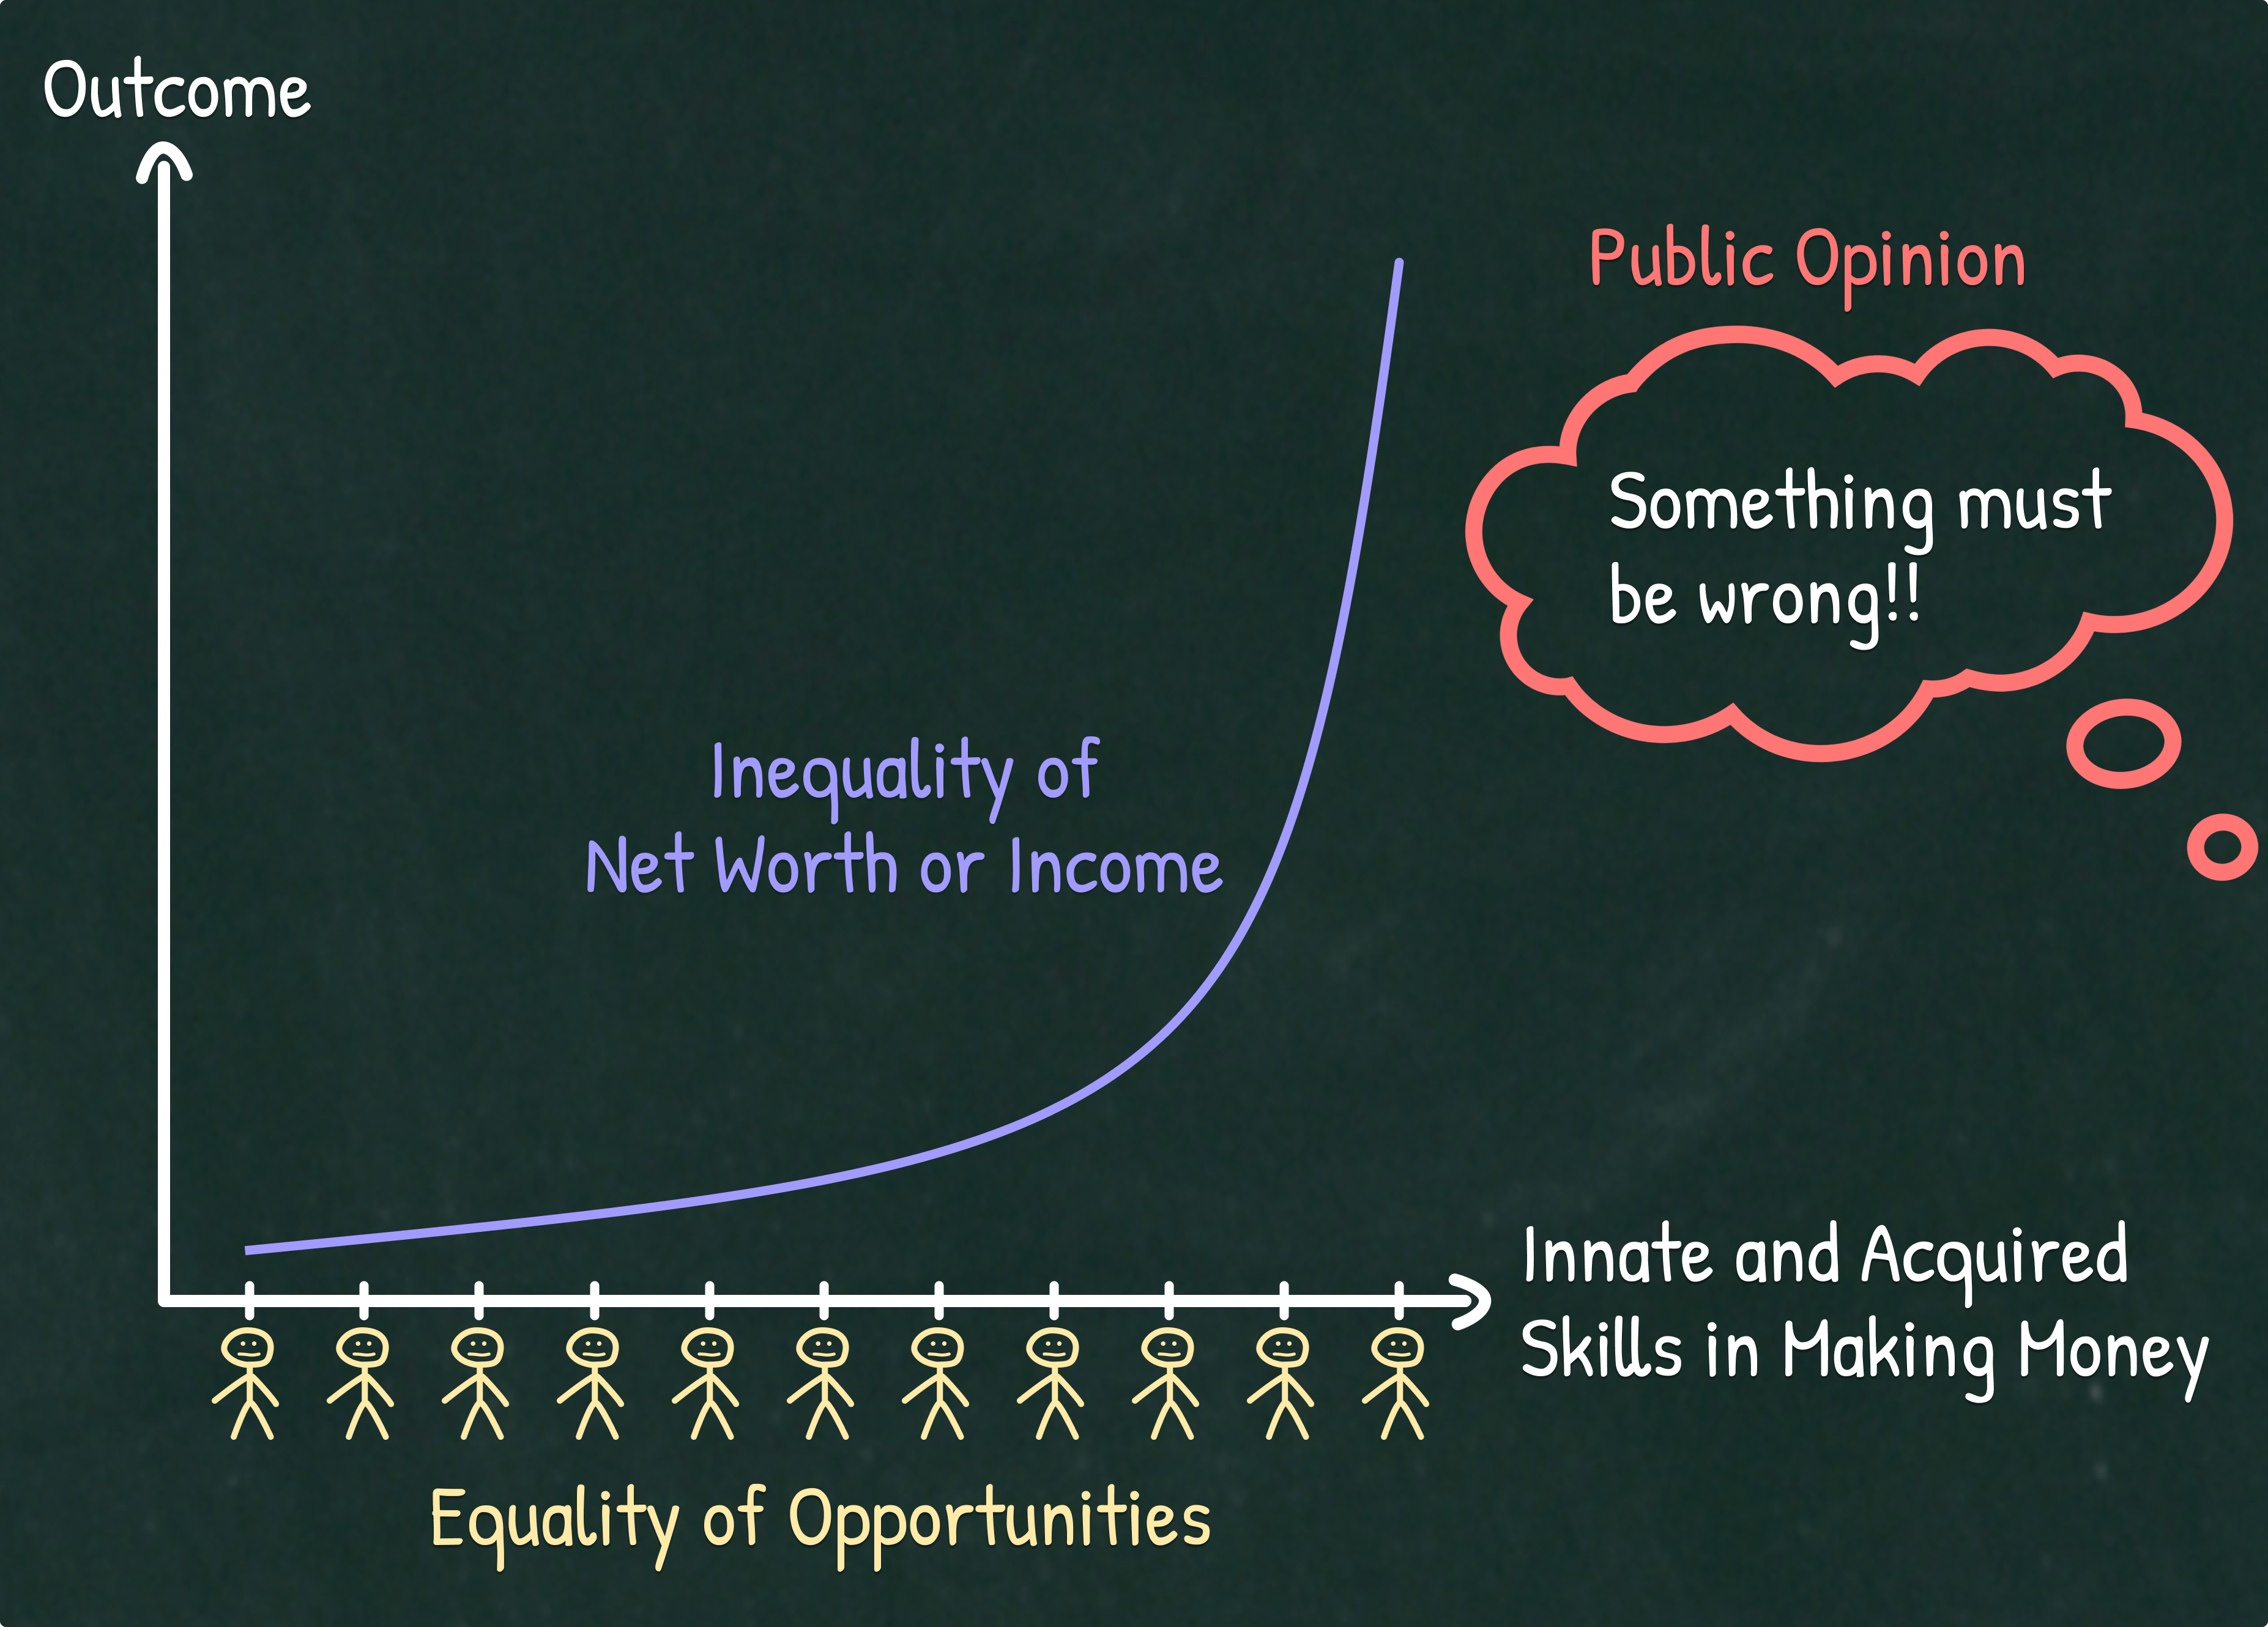 Illustration shows how people are NOT OK with inequality of outcomes when the skill is "making money", even when there is equality of opportunities